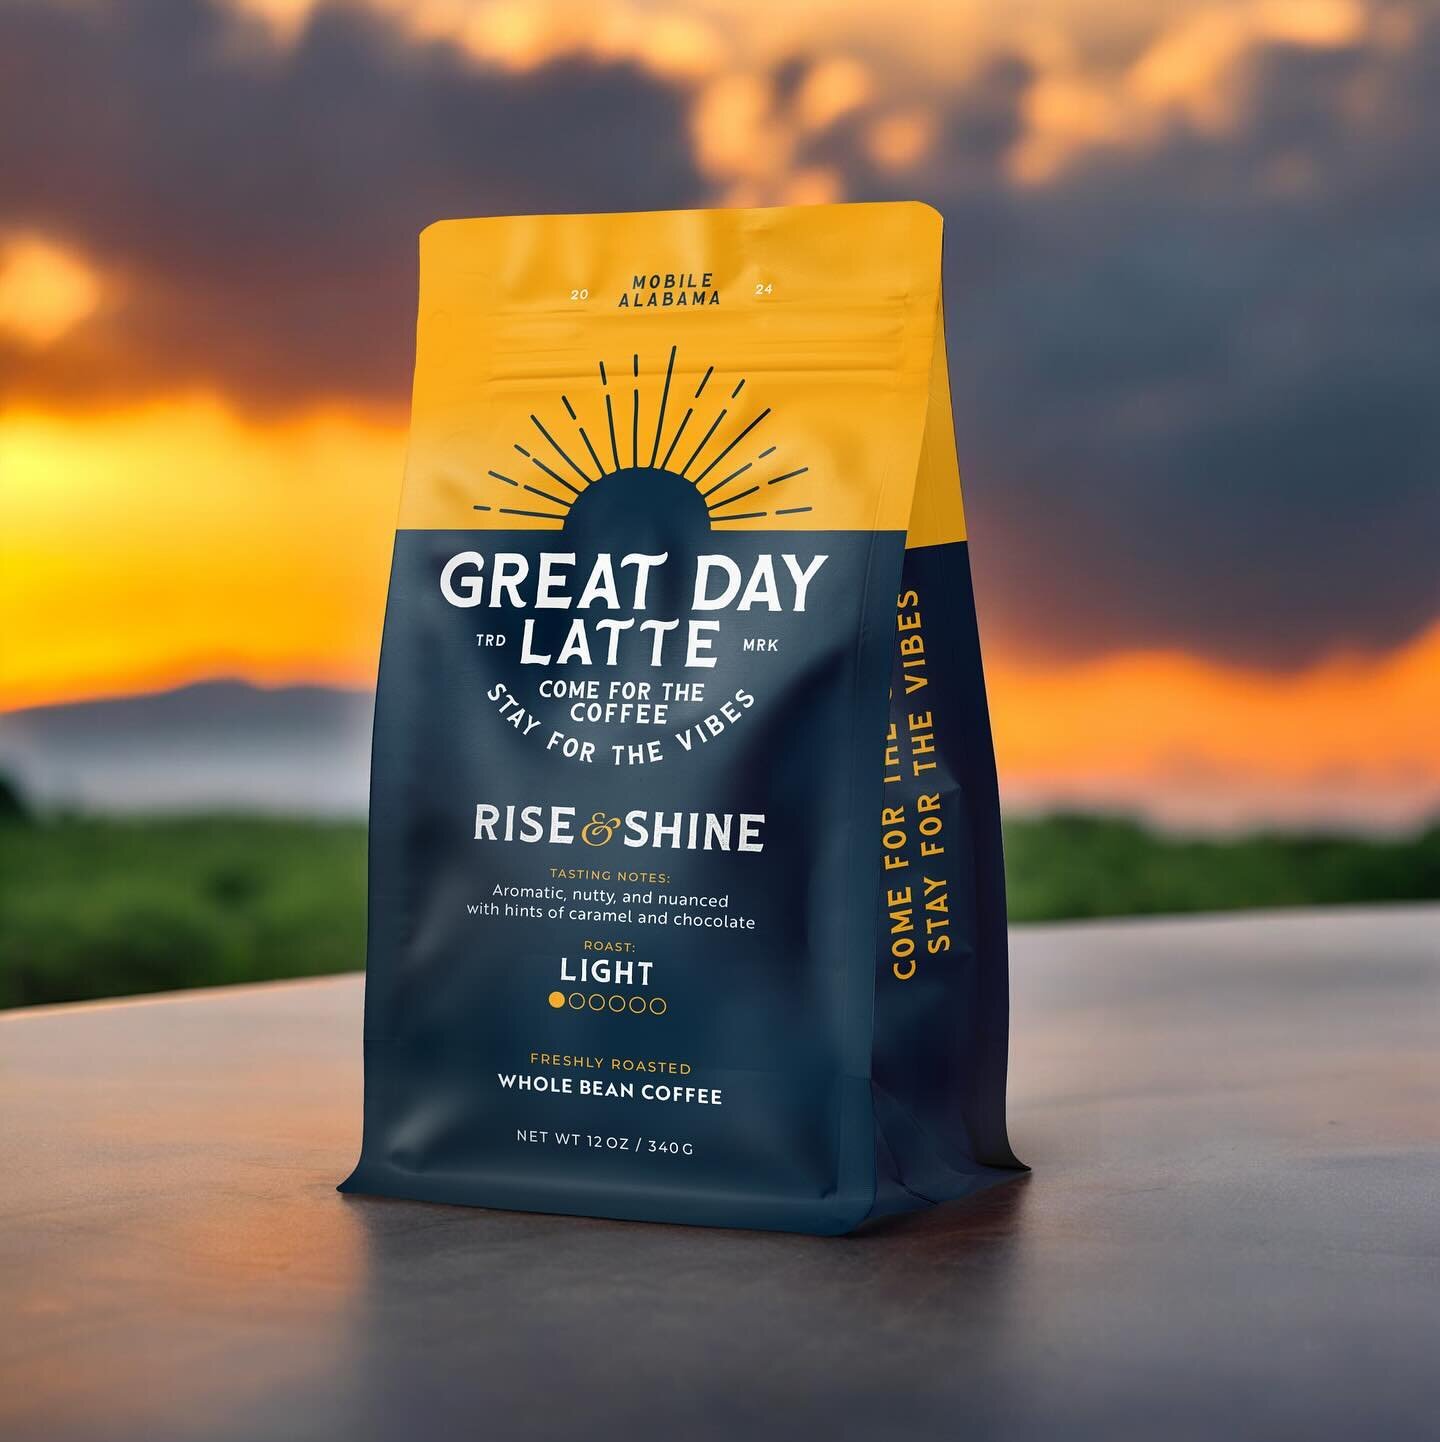 Working with sweet, friendly, appreciative clients makes my heart sing. Thank you @greatdaylatte and @iamericabarrett for making GREAT things happen 🫶

New #coffee #branding and #packaging for Great Day Latte (coming soon) in Mobile, Alabama.